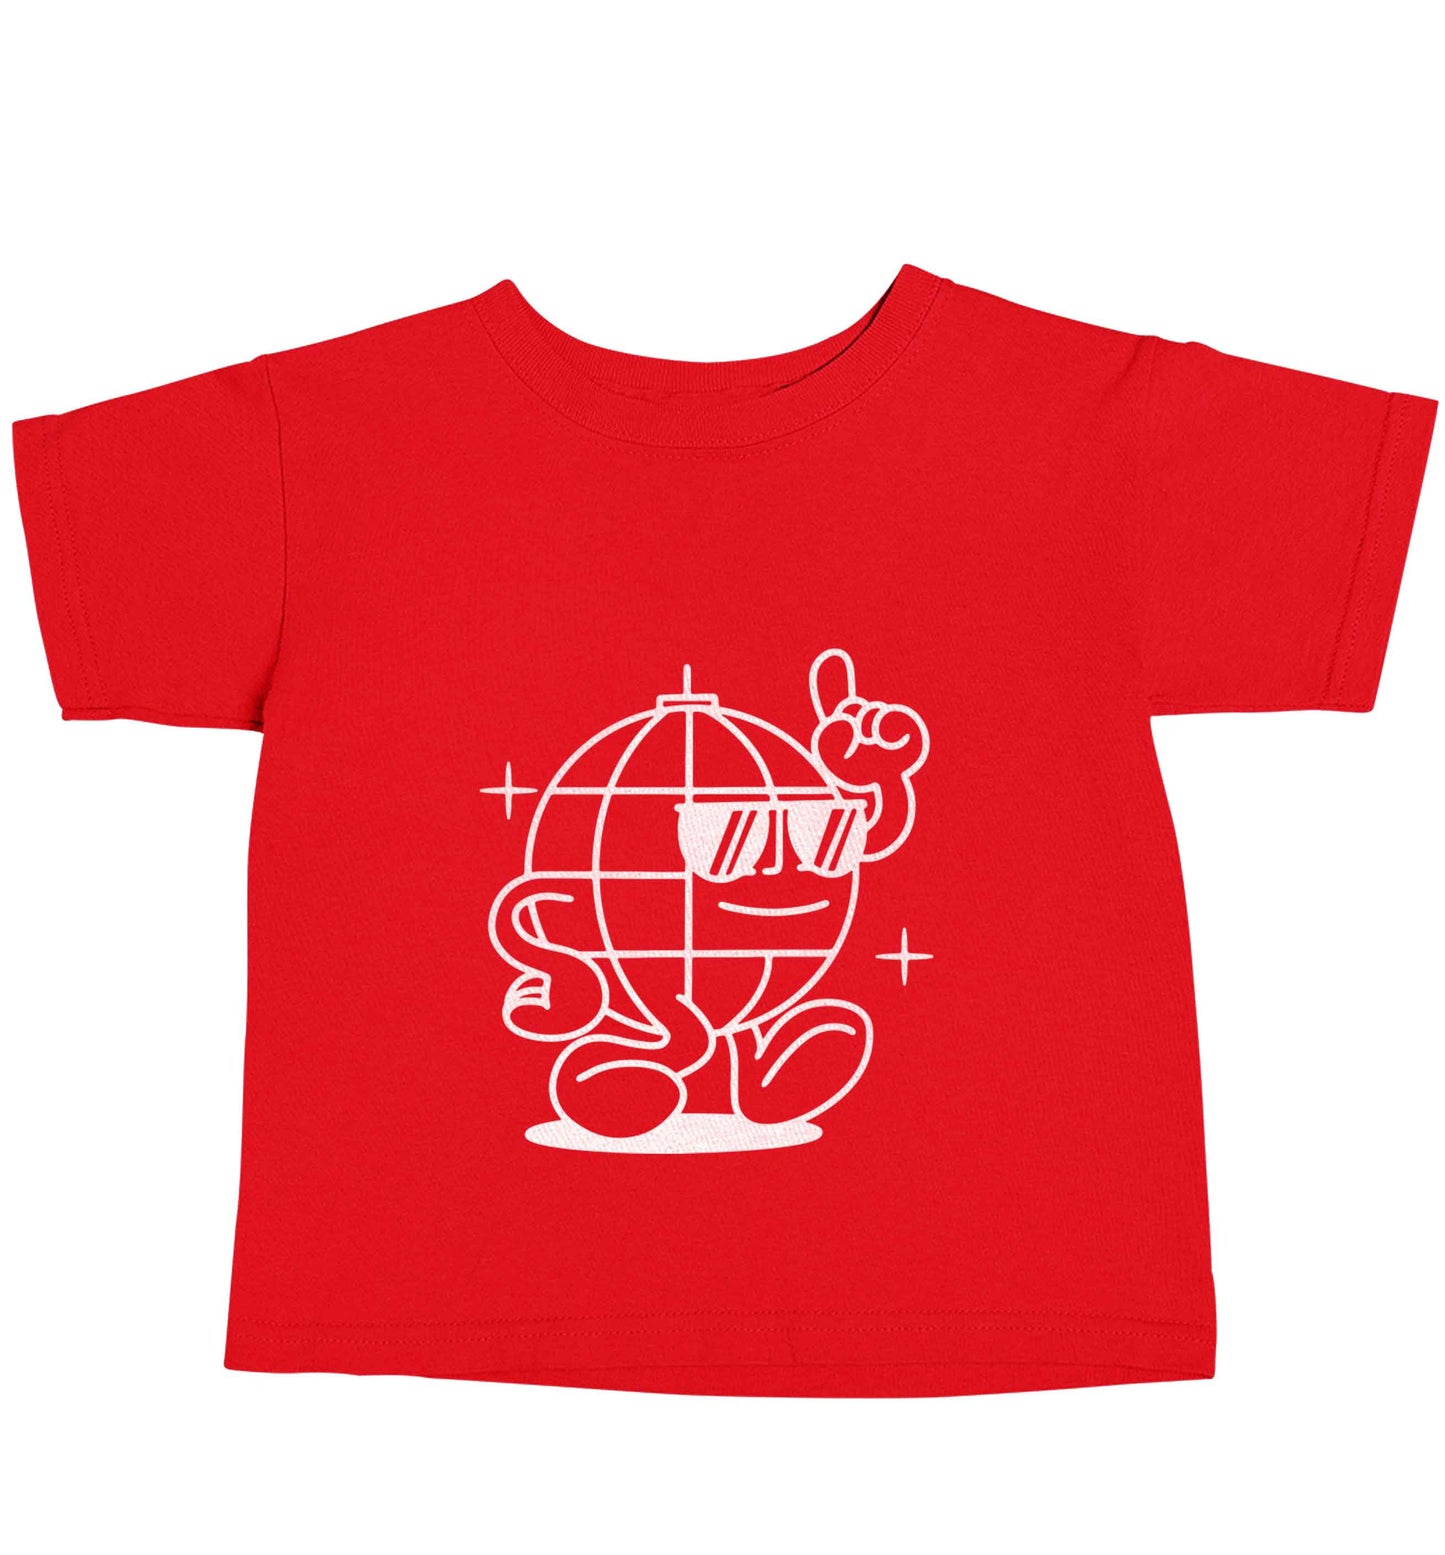 Disco ball red baby toddler Tshirt 2 Years